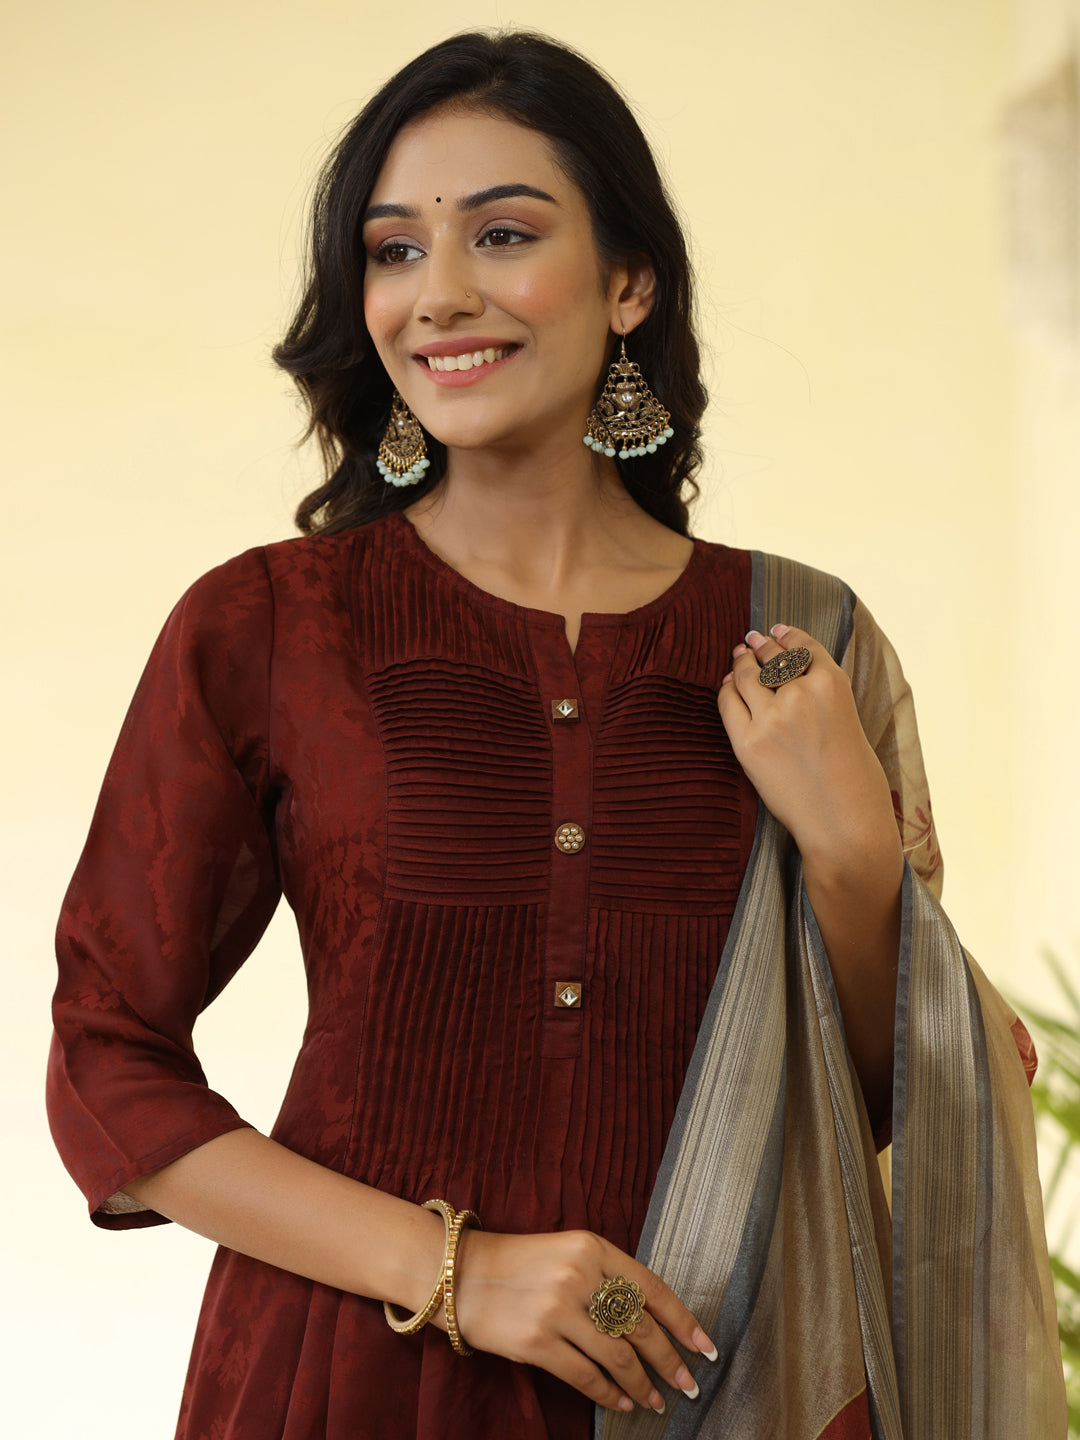 Brown Silk Pleated Straight Kurta Has Round Neck, Front Placket And Buttons With Both Side Pleats, Three Fourth Regular Sleeves, Flared Hemline, Cotton Mulmul Lining Is Attached To Kurta, Brown Pants Has Both Side Pocket And Partially Elastic Waist, Organza Printed Dupatta.